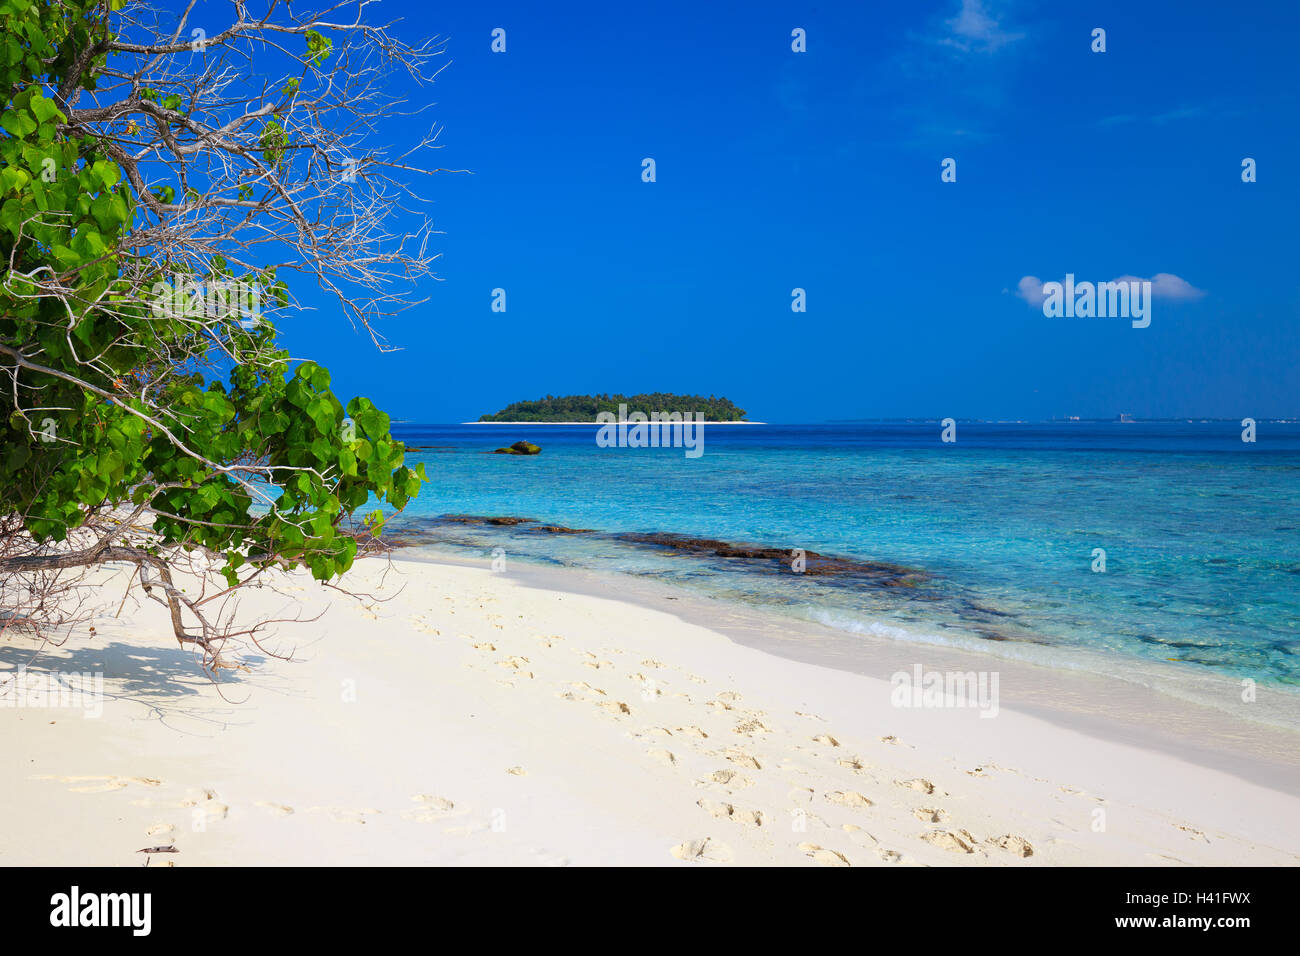 Tropical Maldives island with sandy beach with palm trees and turquoise clear water Stock Photo